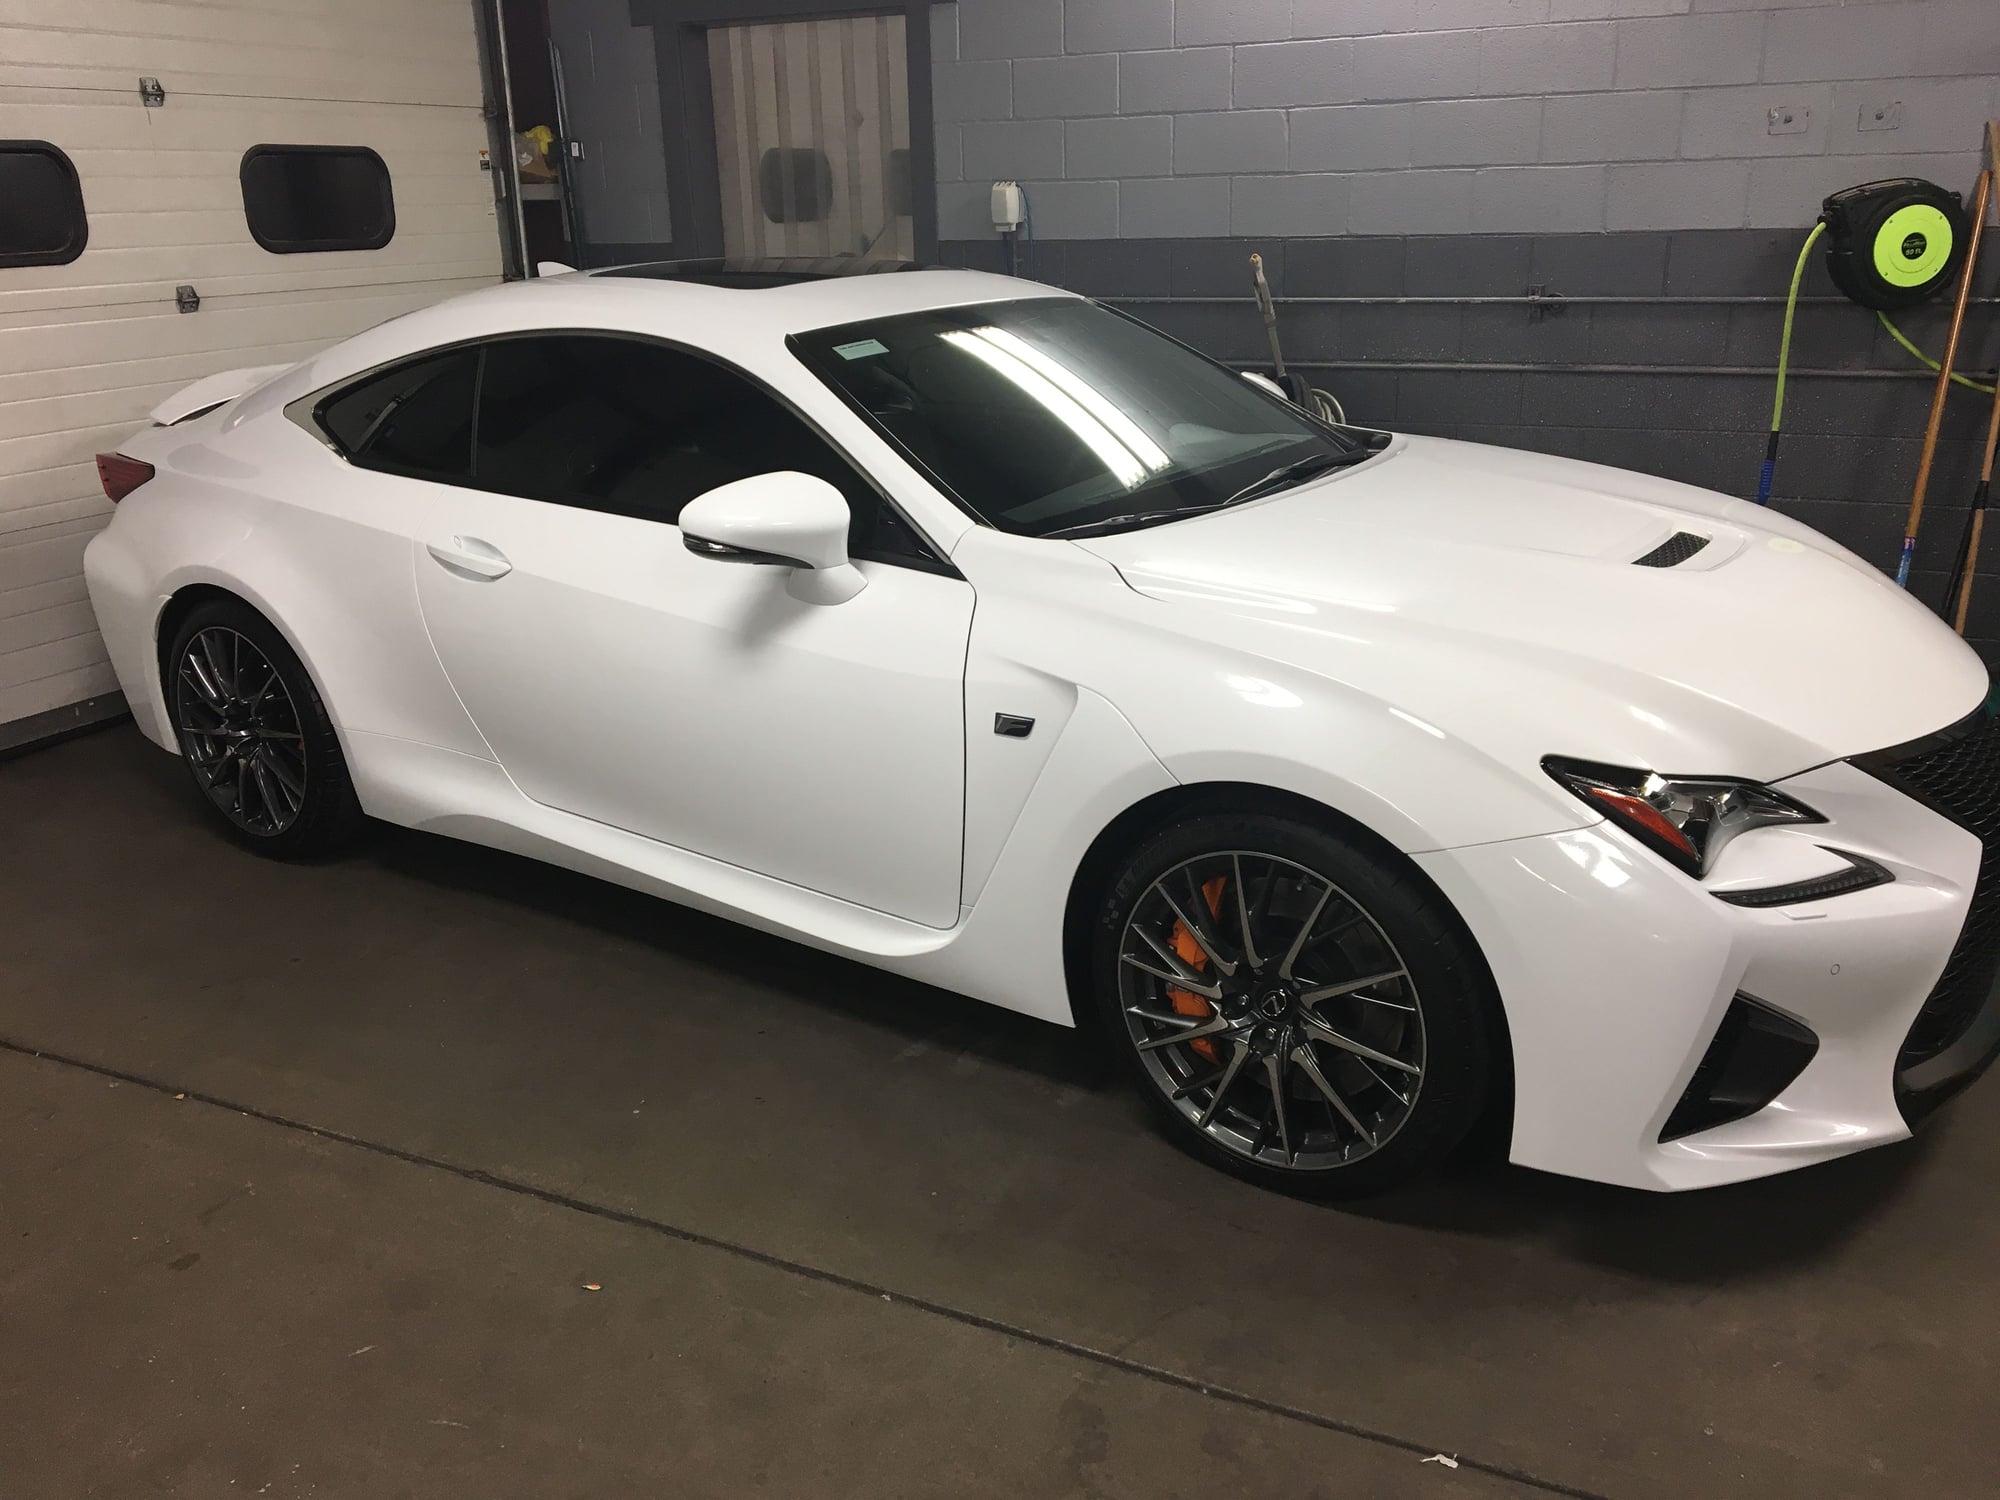 2017 Lexus RC F - 2017 RCF 4,000 miles - Used - VIN Jthhp5bcxh5006663 - 4,100 Miles - 8 cyl - 2WD - Automatic - Coupe - White - El Paso, TX 79936, United States